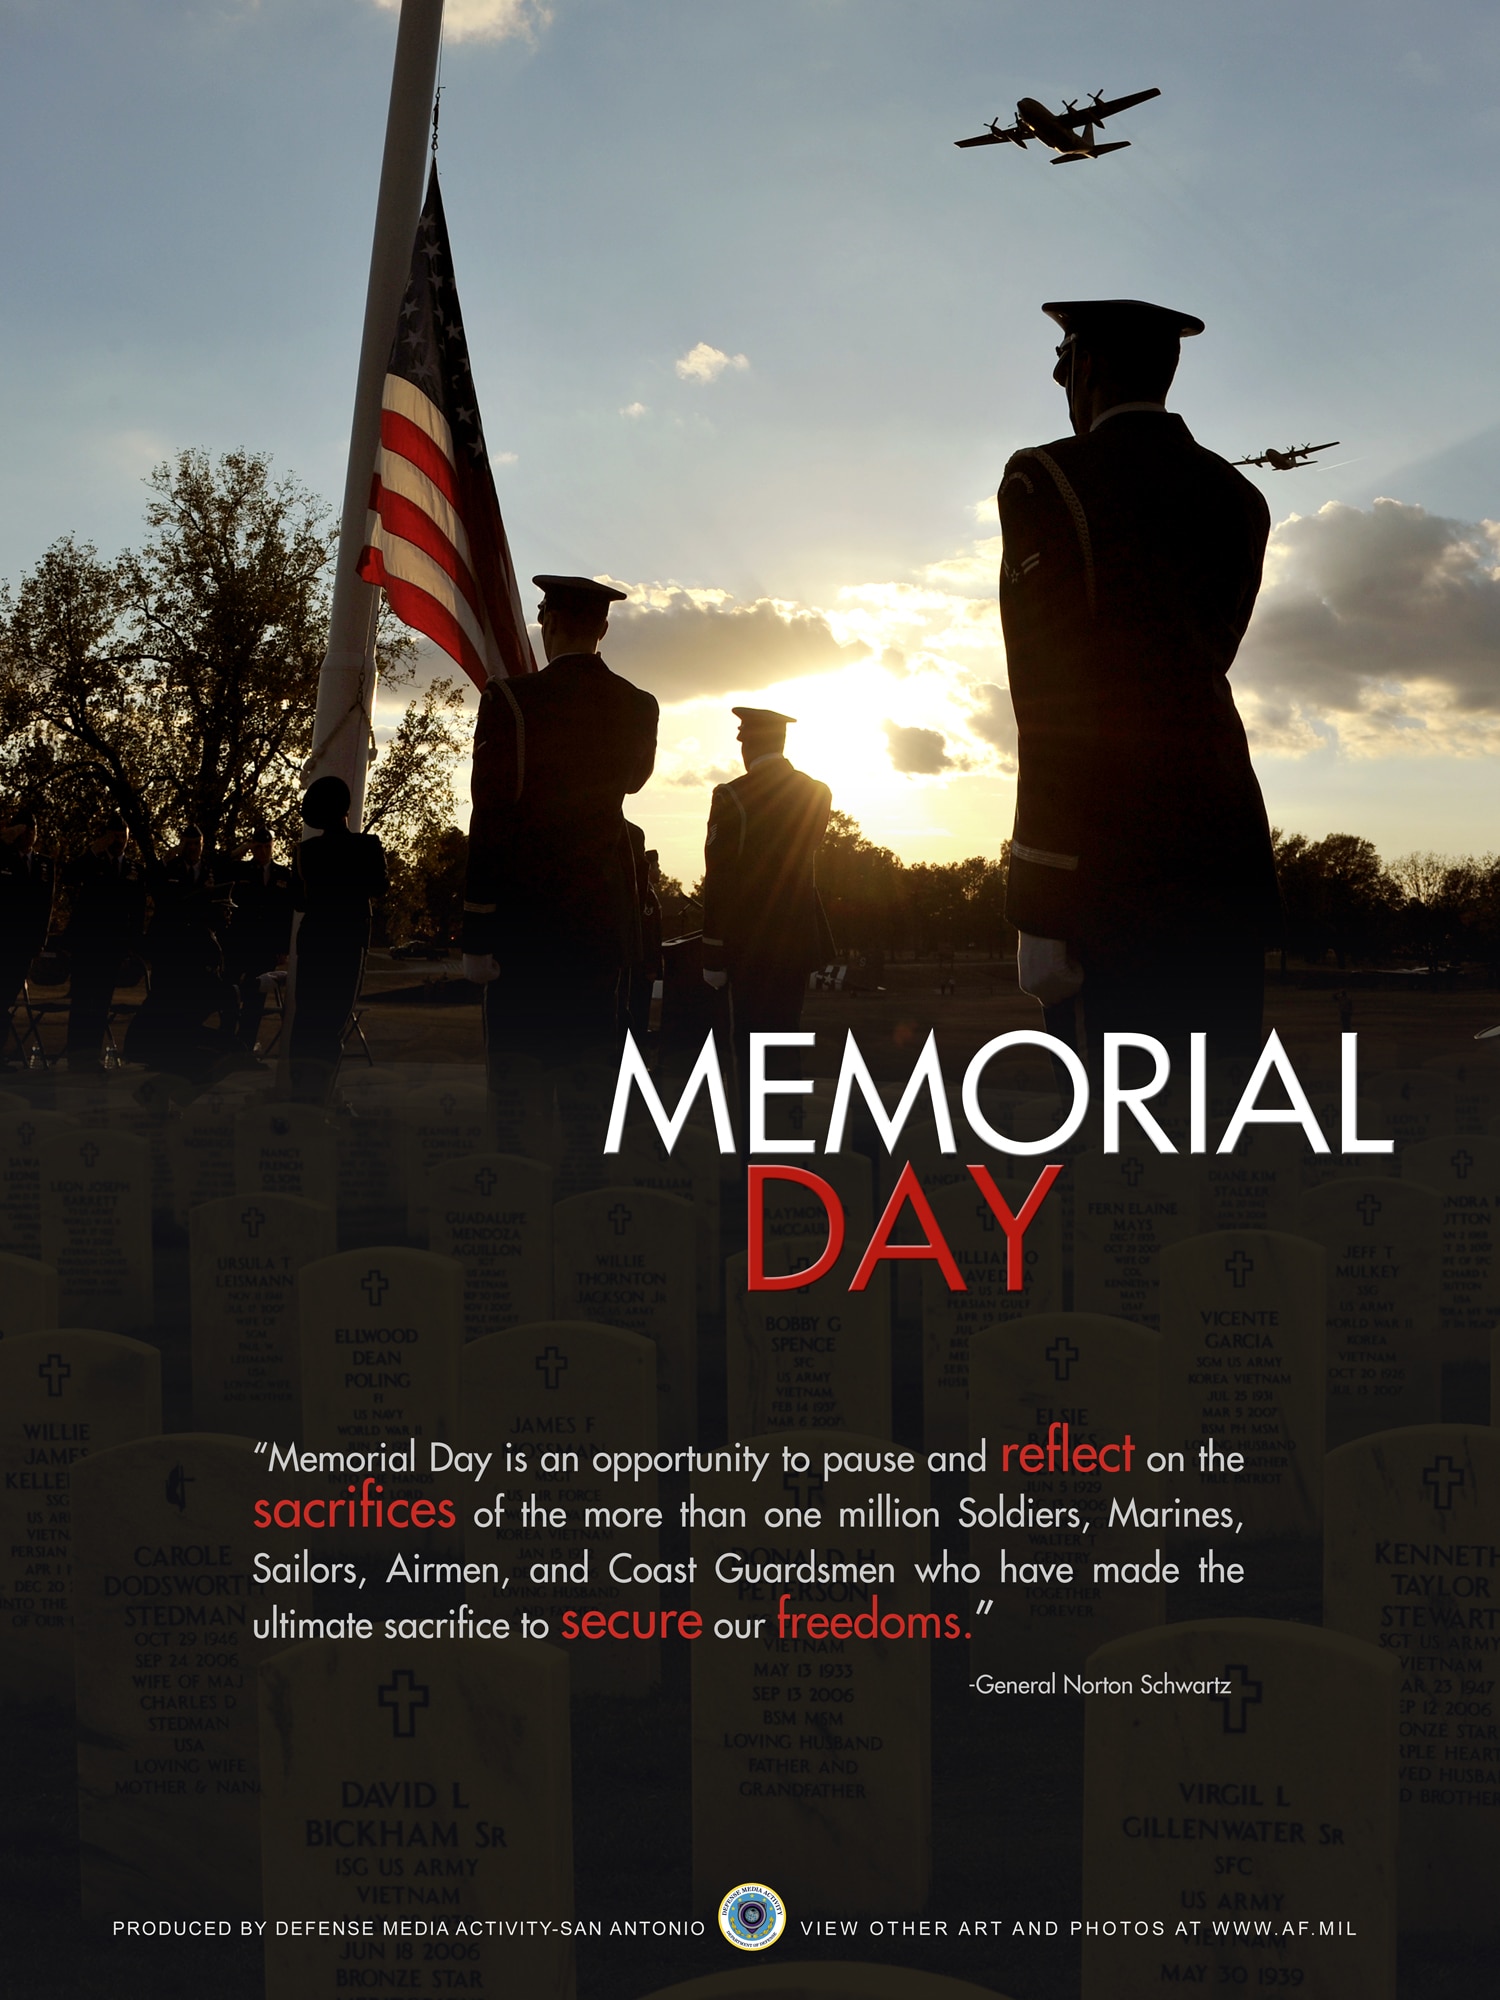 Memorial Day 2011.  This poster was created by Corey Parrish of the Defense Media Activity-San Antonio. AF.mil does not provide printed posters but a PDF file of this poster is available for local printing up to 48x36 inches. Requests can be made to afgraphics@dma.mil. Please specify the title and number.